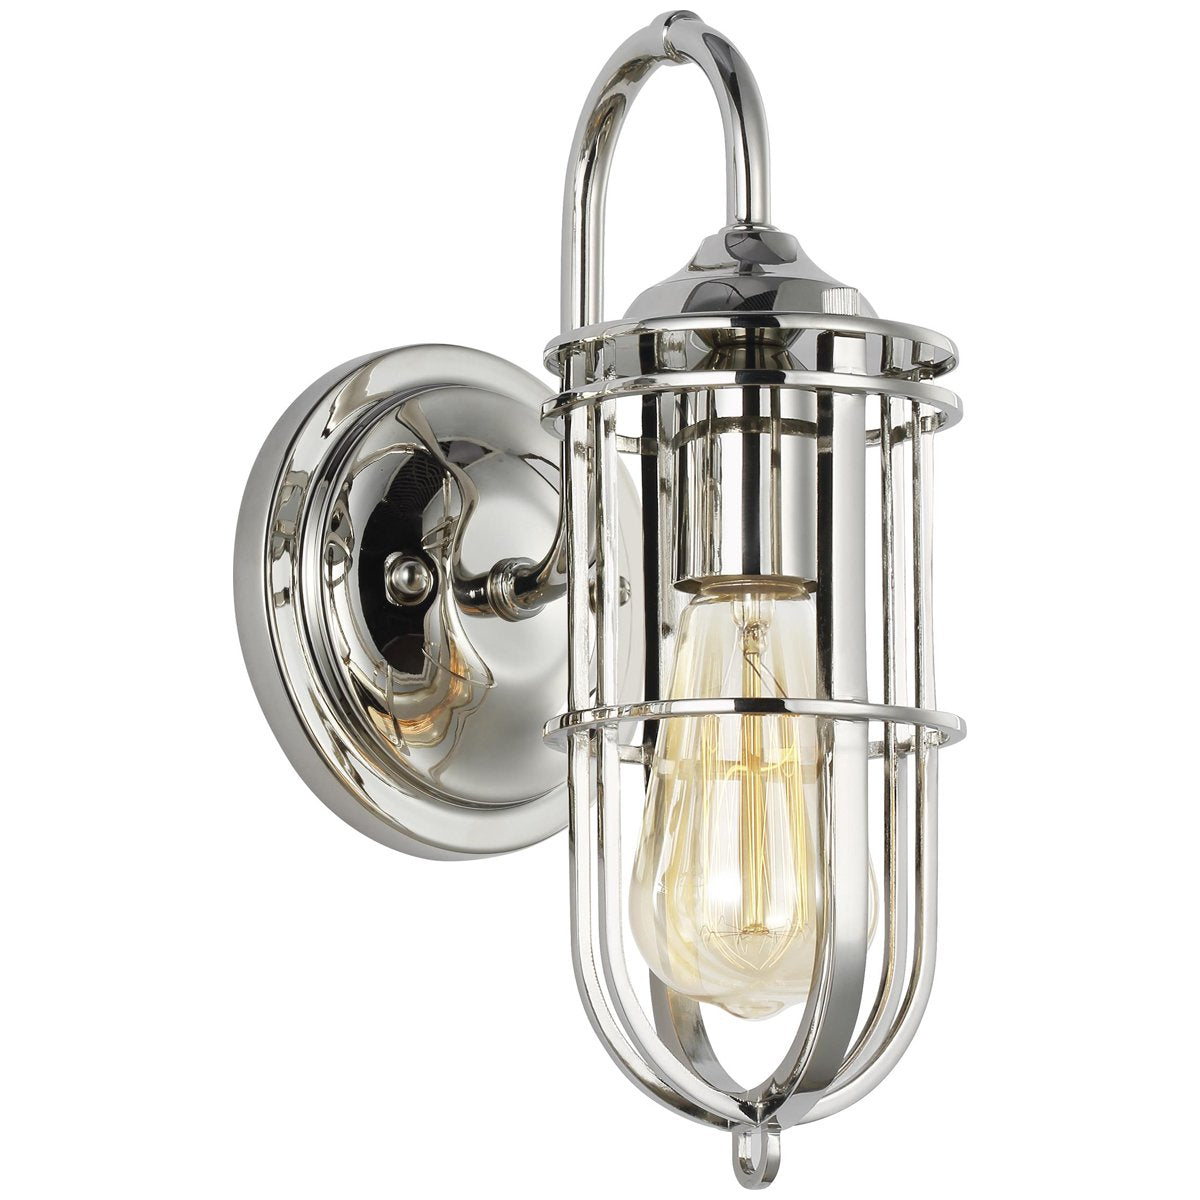 Feiss Urban Renewal 1-Light Wall Sconce - Polished Nickel